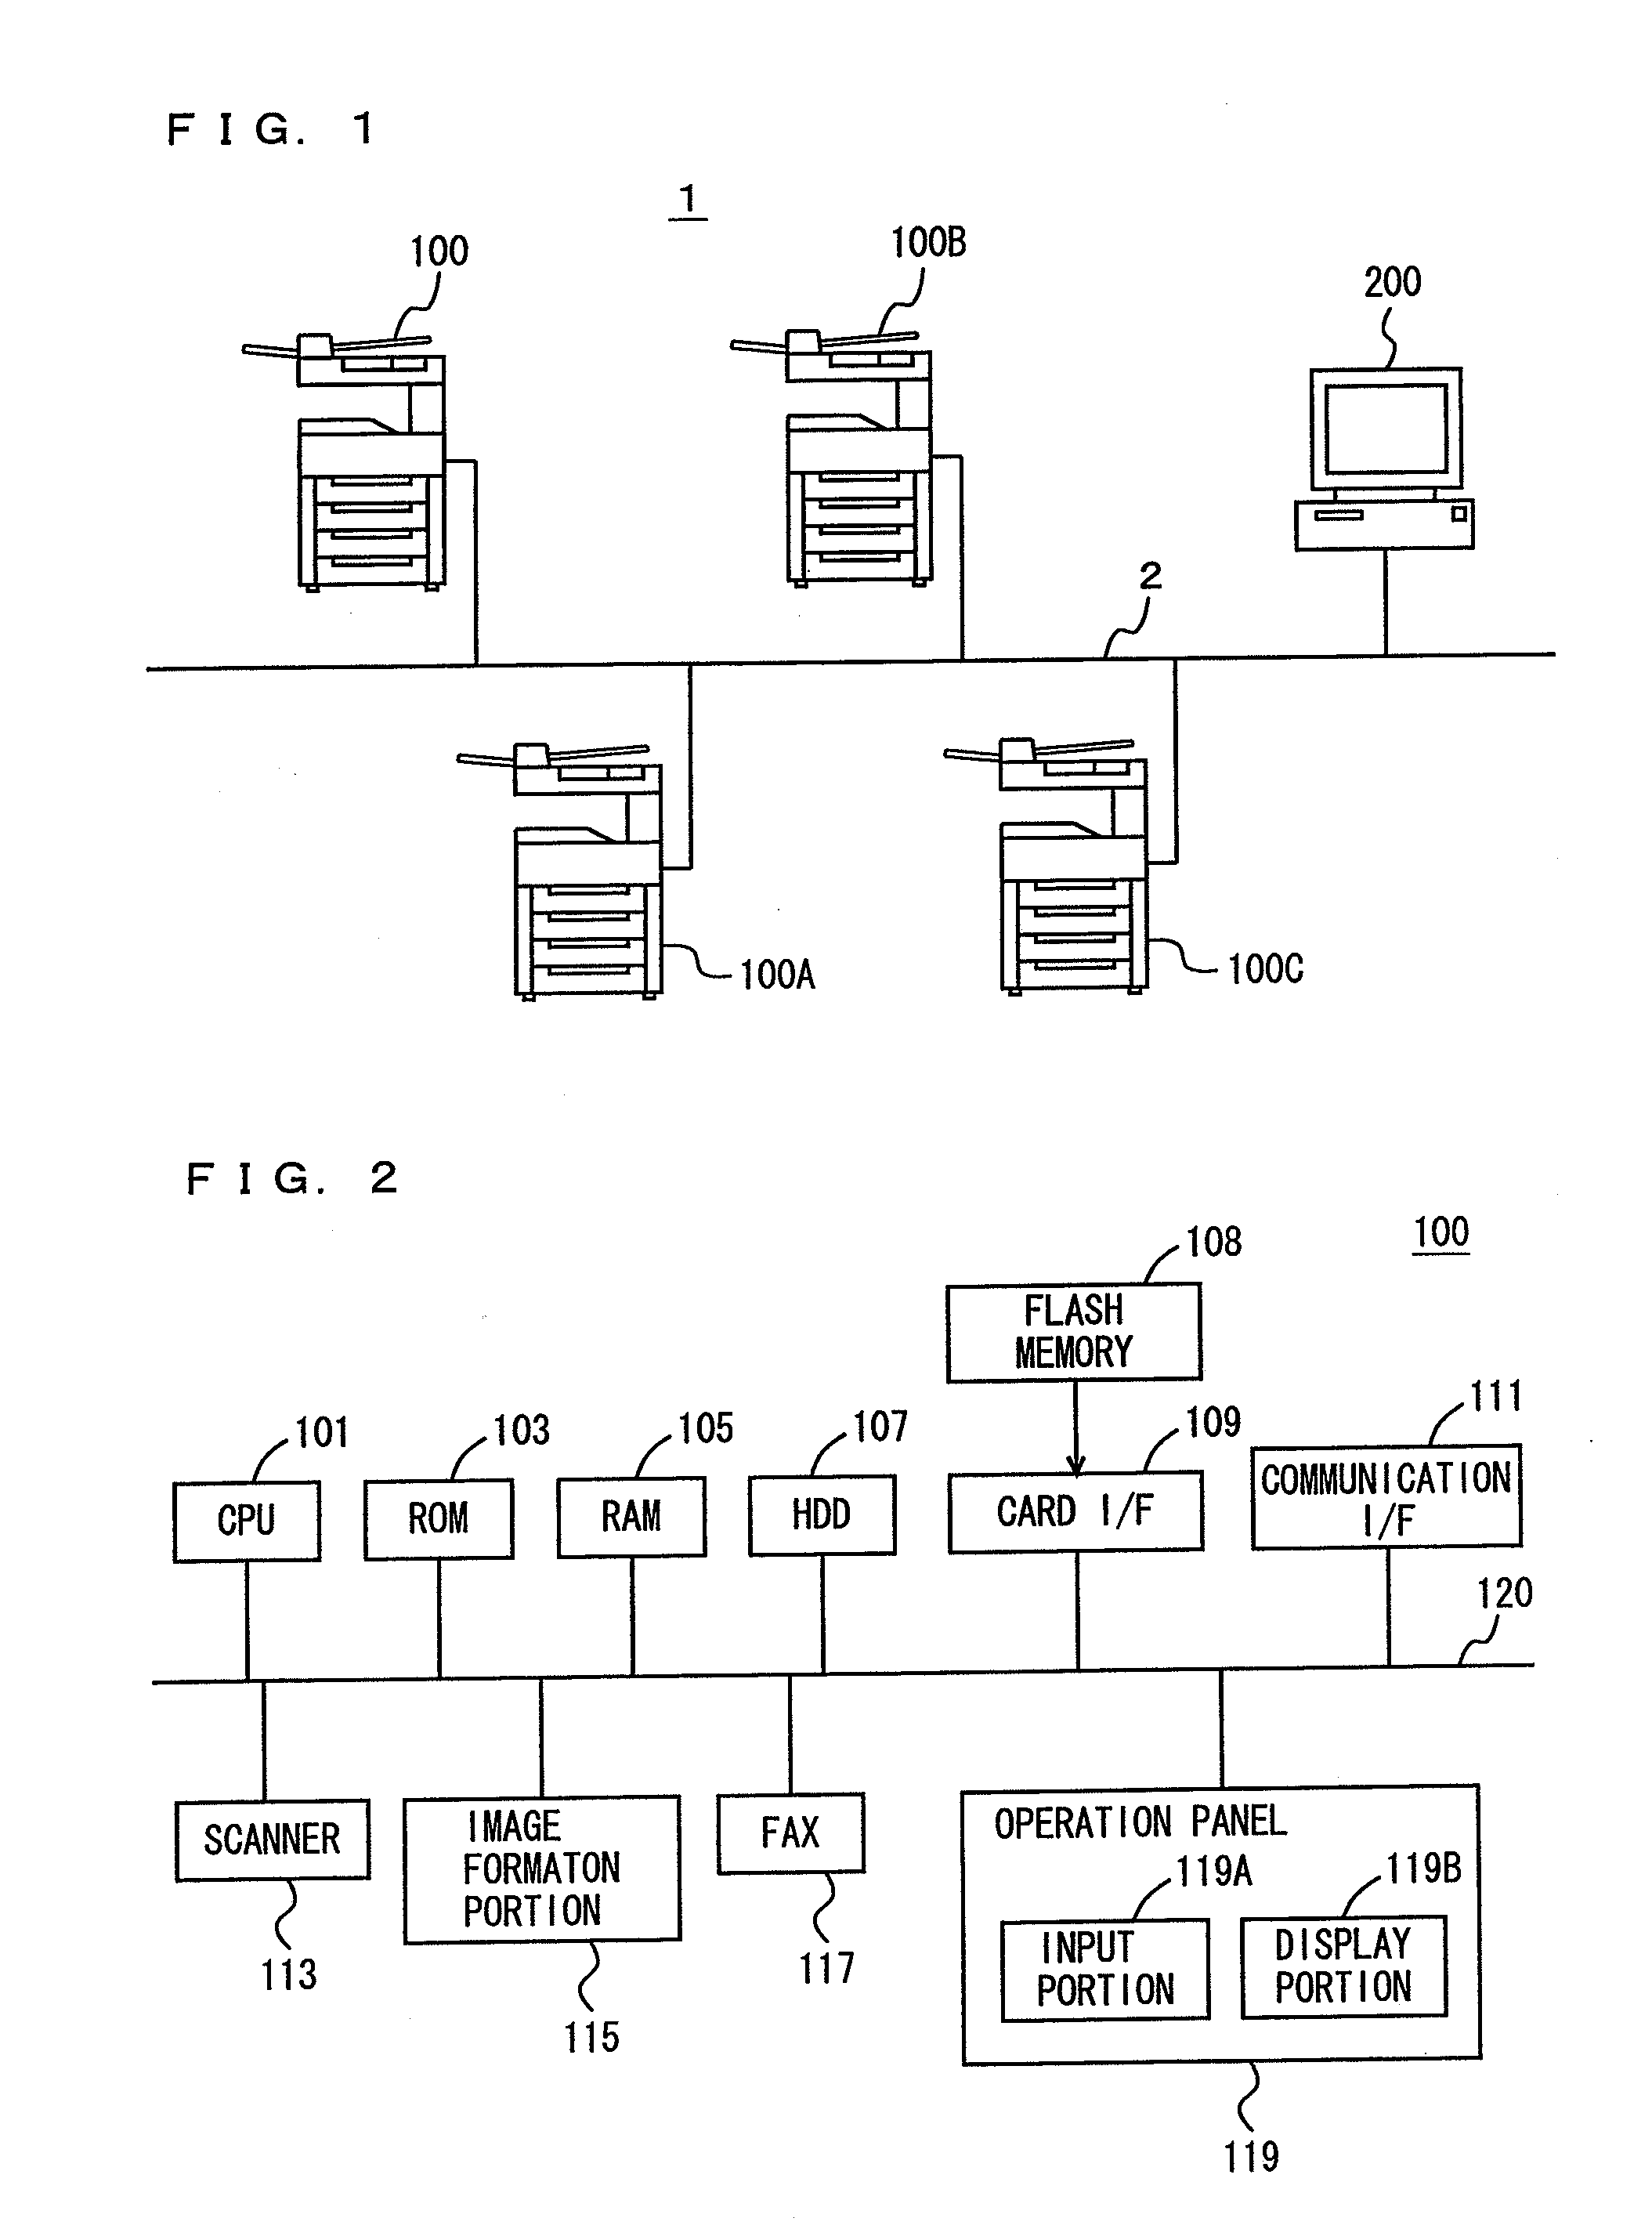 Image forming apparatus performing image formation on print data, image processing system including plurality of image forming apparatuses, print data output method executed on image forming apparatus, and print data output program product